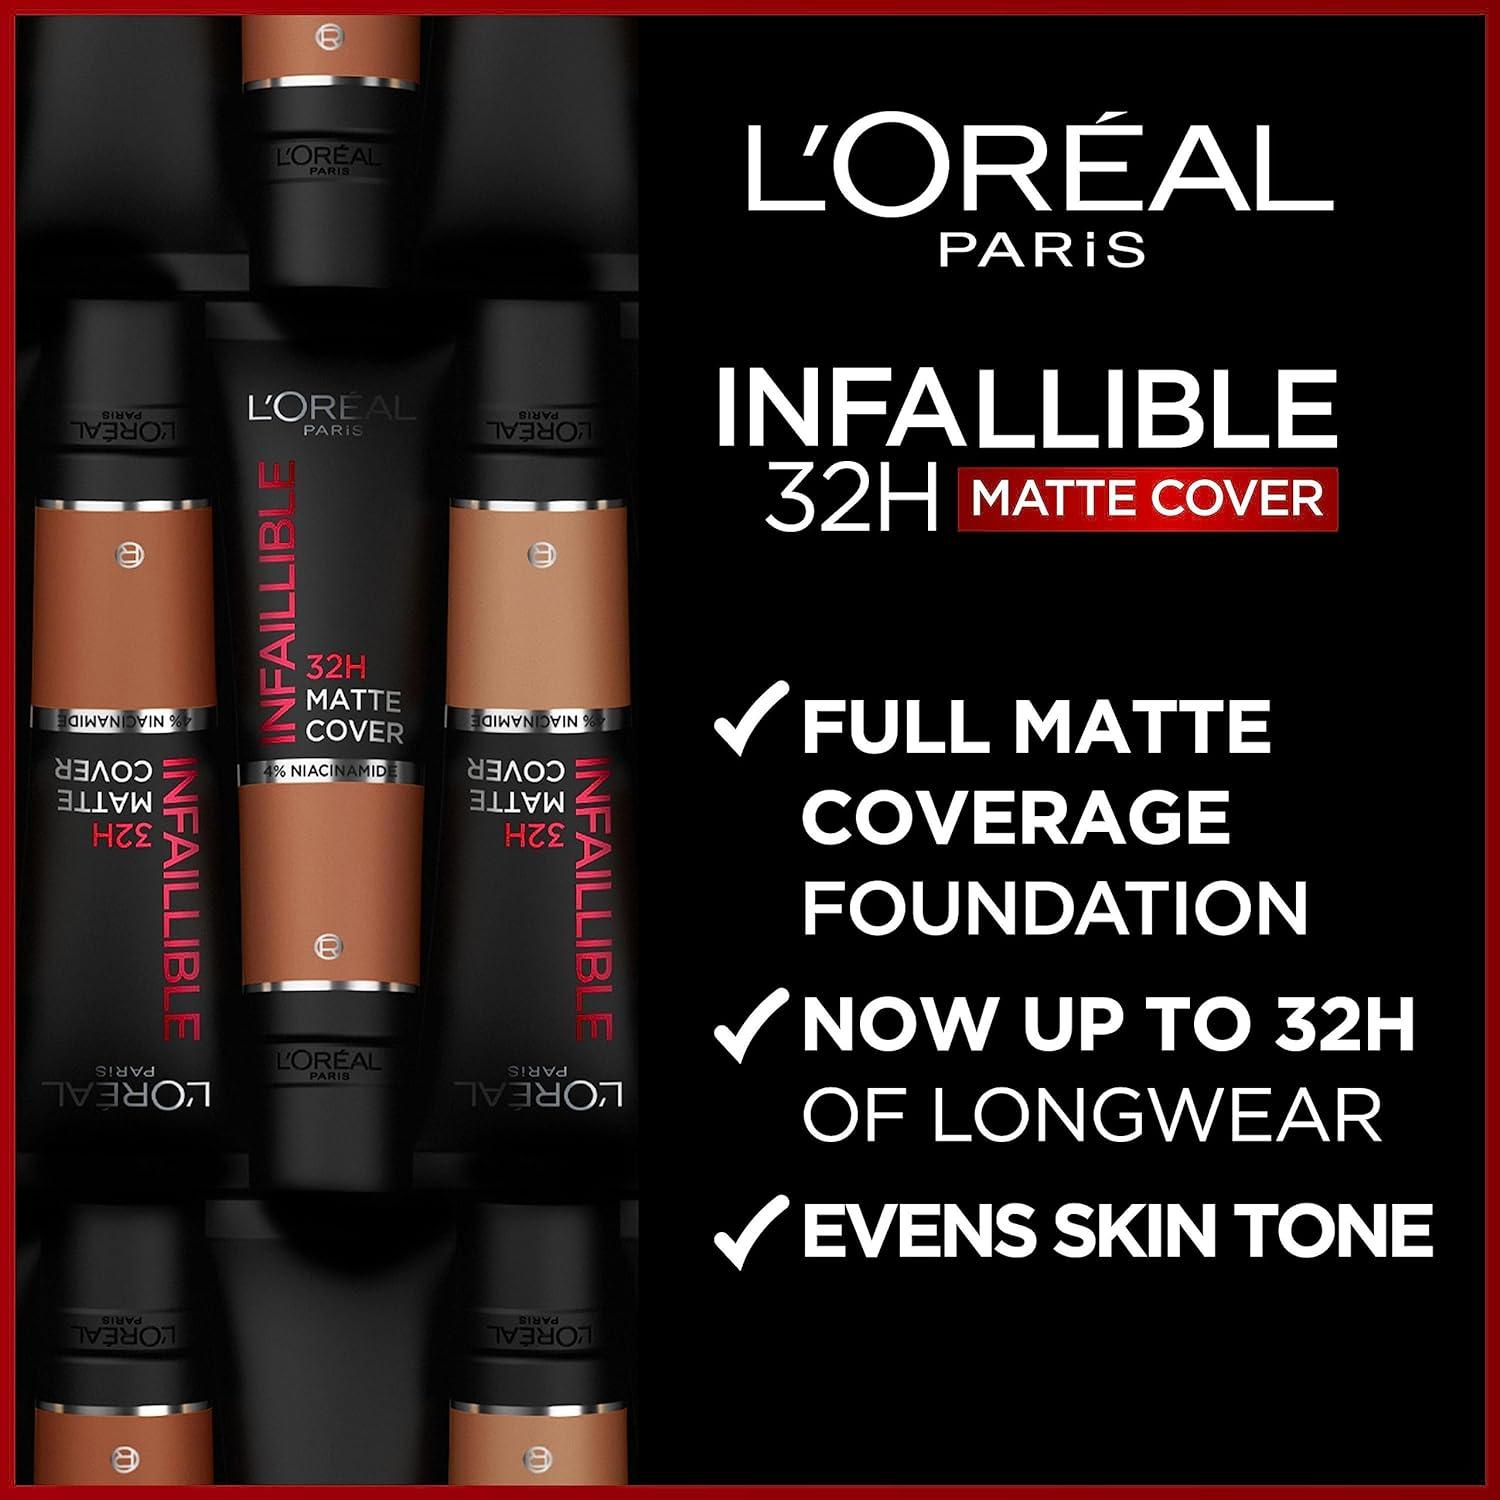 L'Oreal Paris Cover Liquid Foundation With 4% Niacinamide Long Lasting  Natural Finish Available in 20 Shades SPF 25 Infallible 32H Matte Cover  Shade 380 30ml